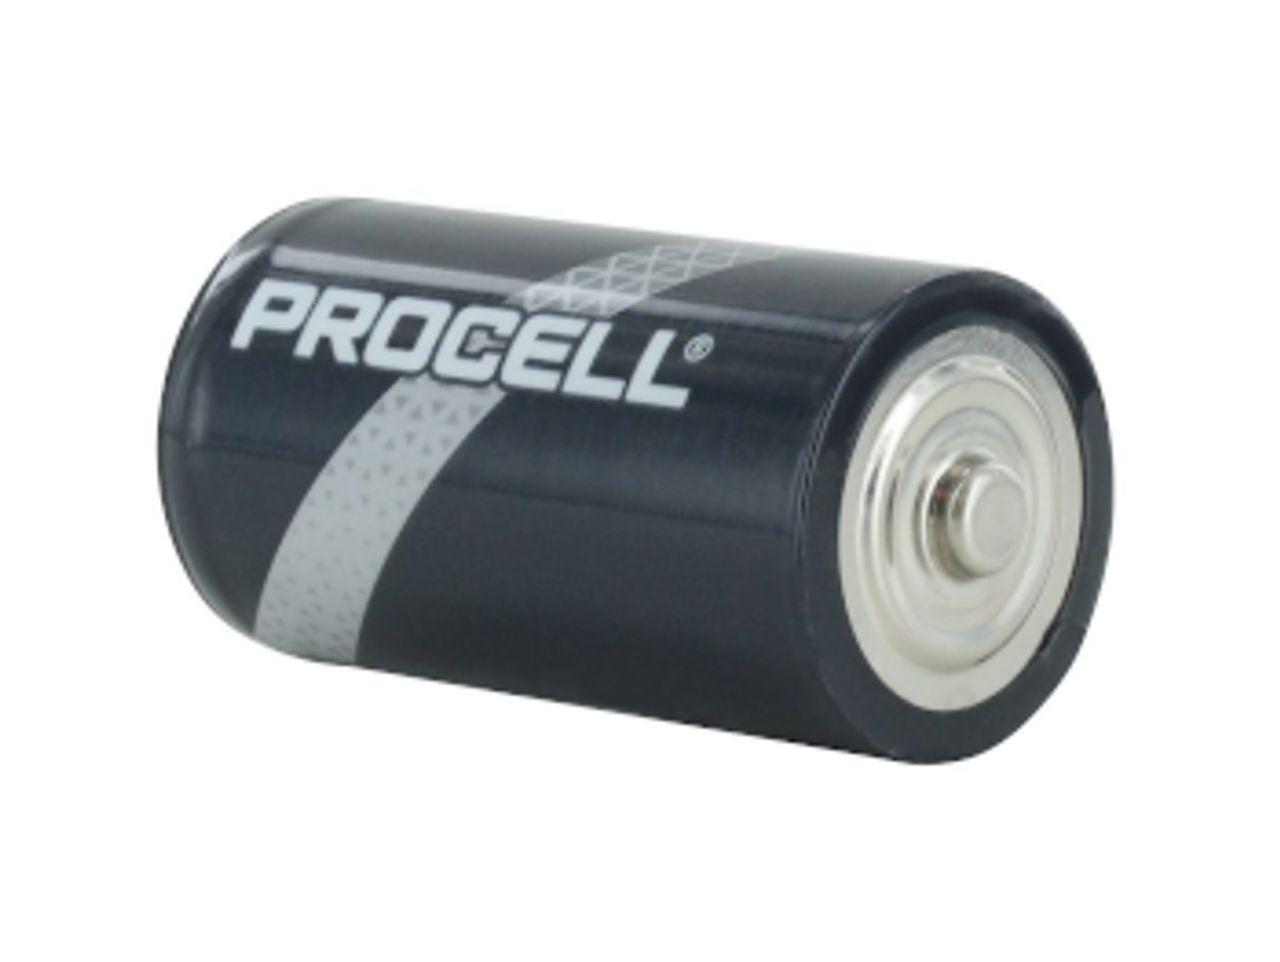 PC1400 - Duracell Procell Alkaline C (12 box)